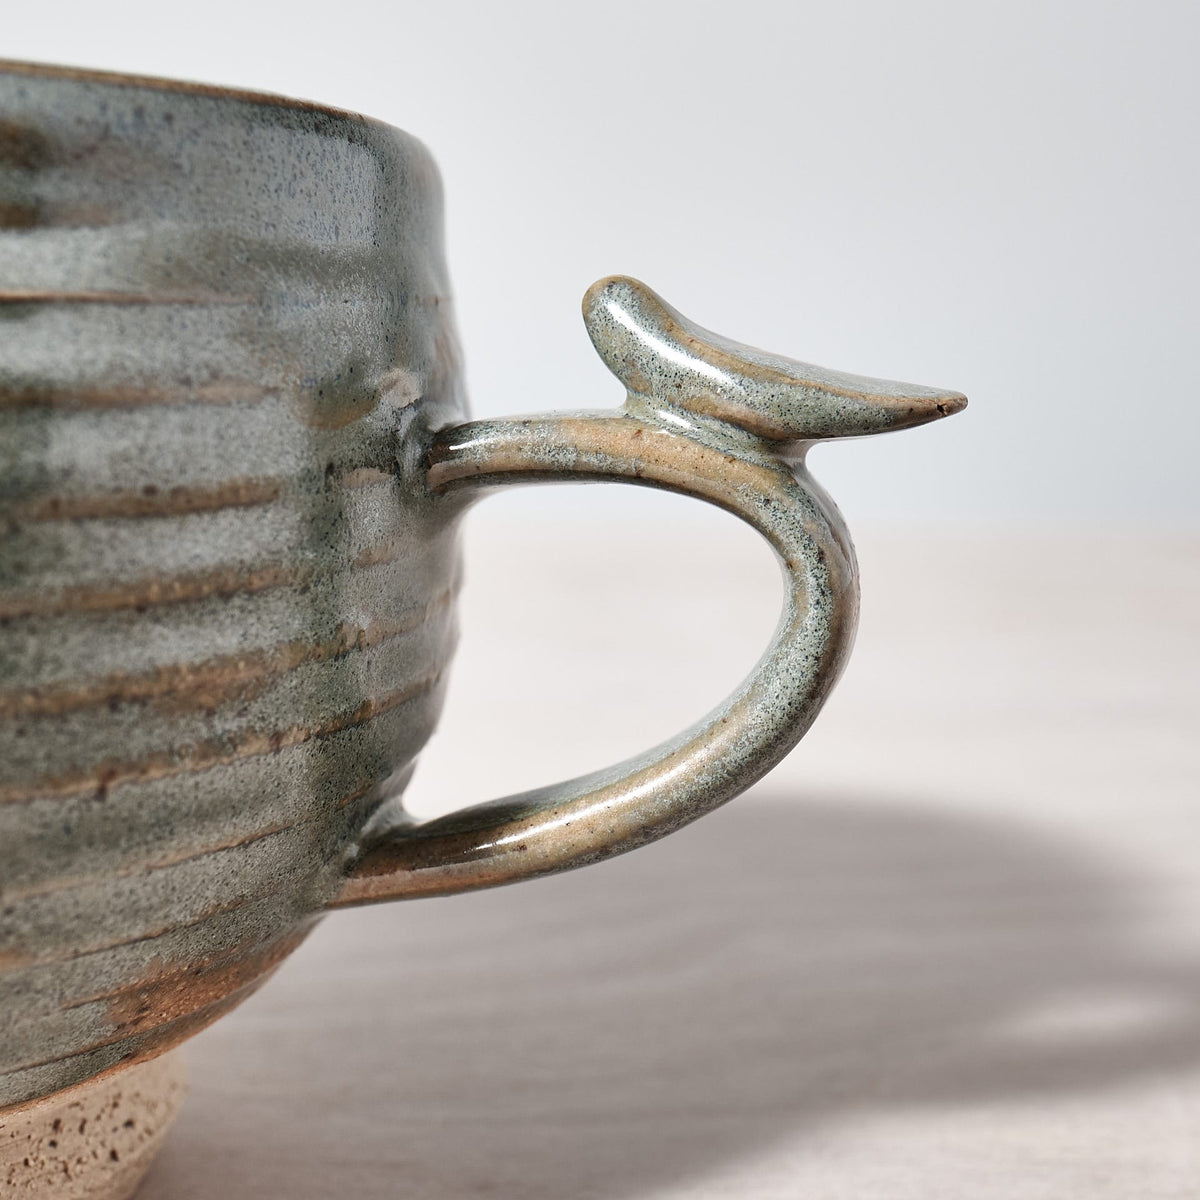 A Bird Handle Cup – Green Tea from Jino Ceramic Studio with a handle and a bird on it.